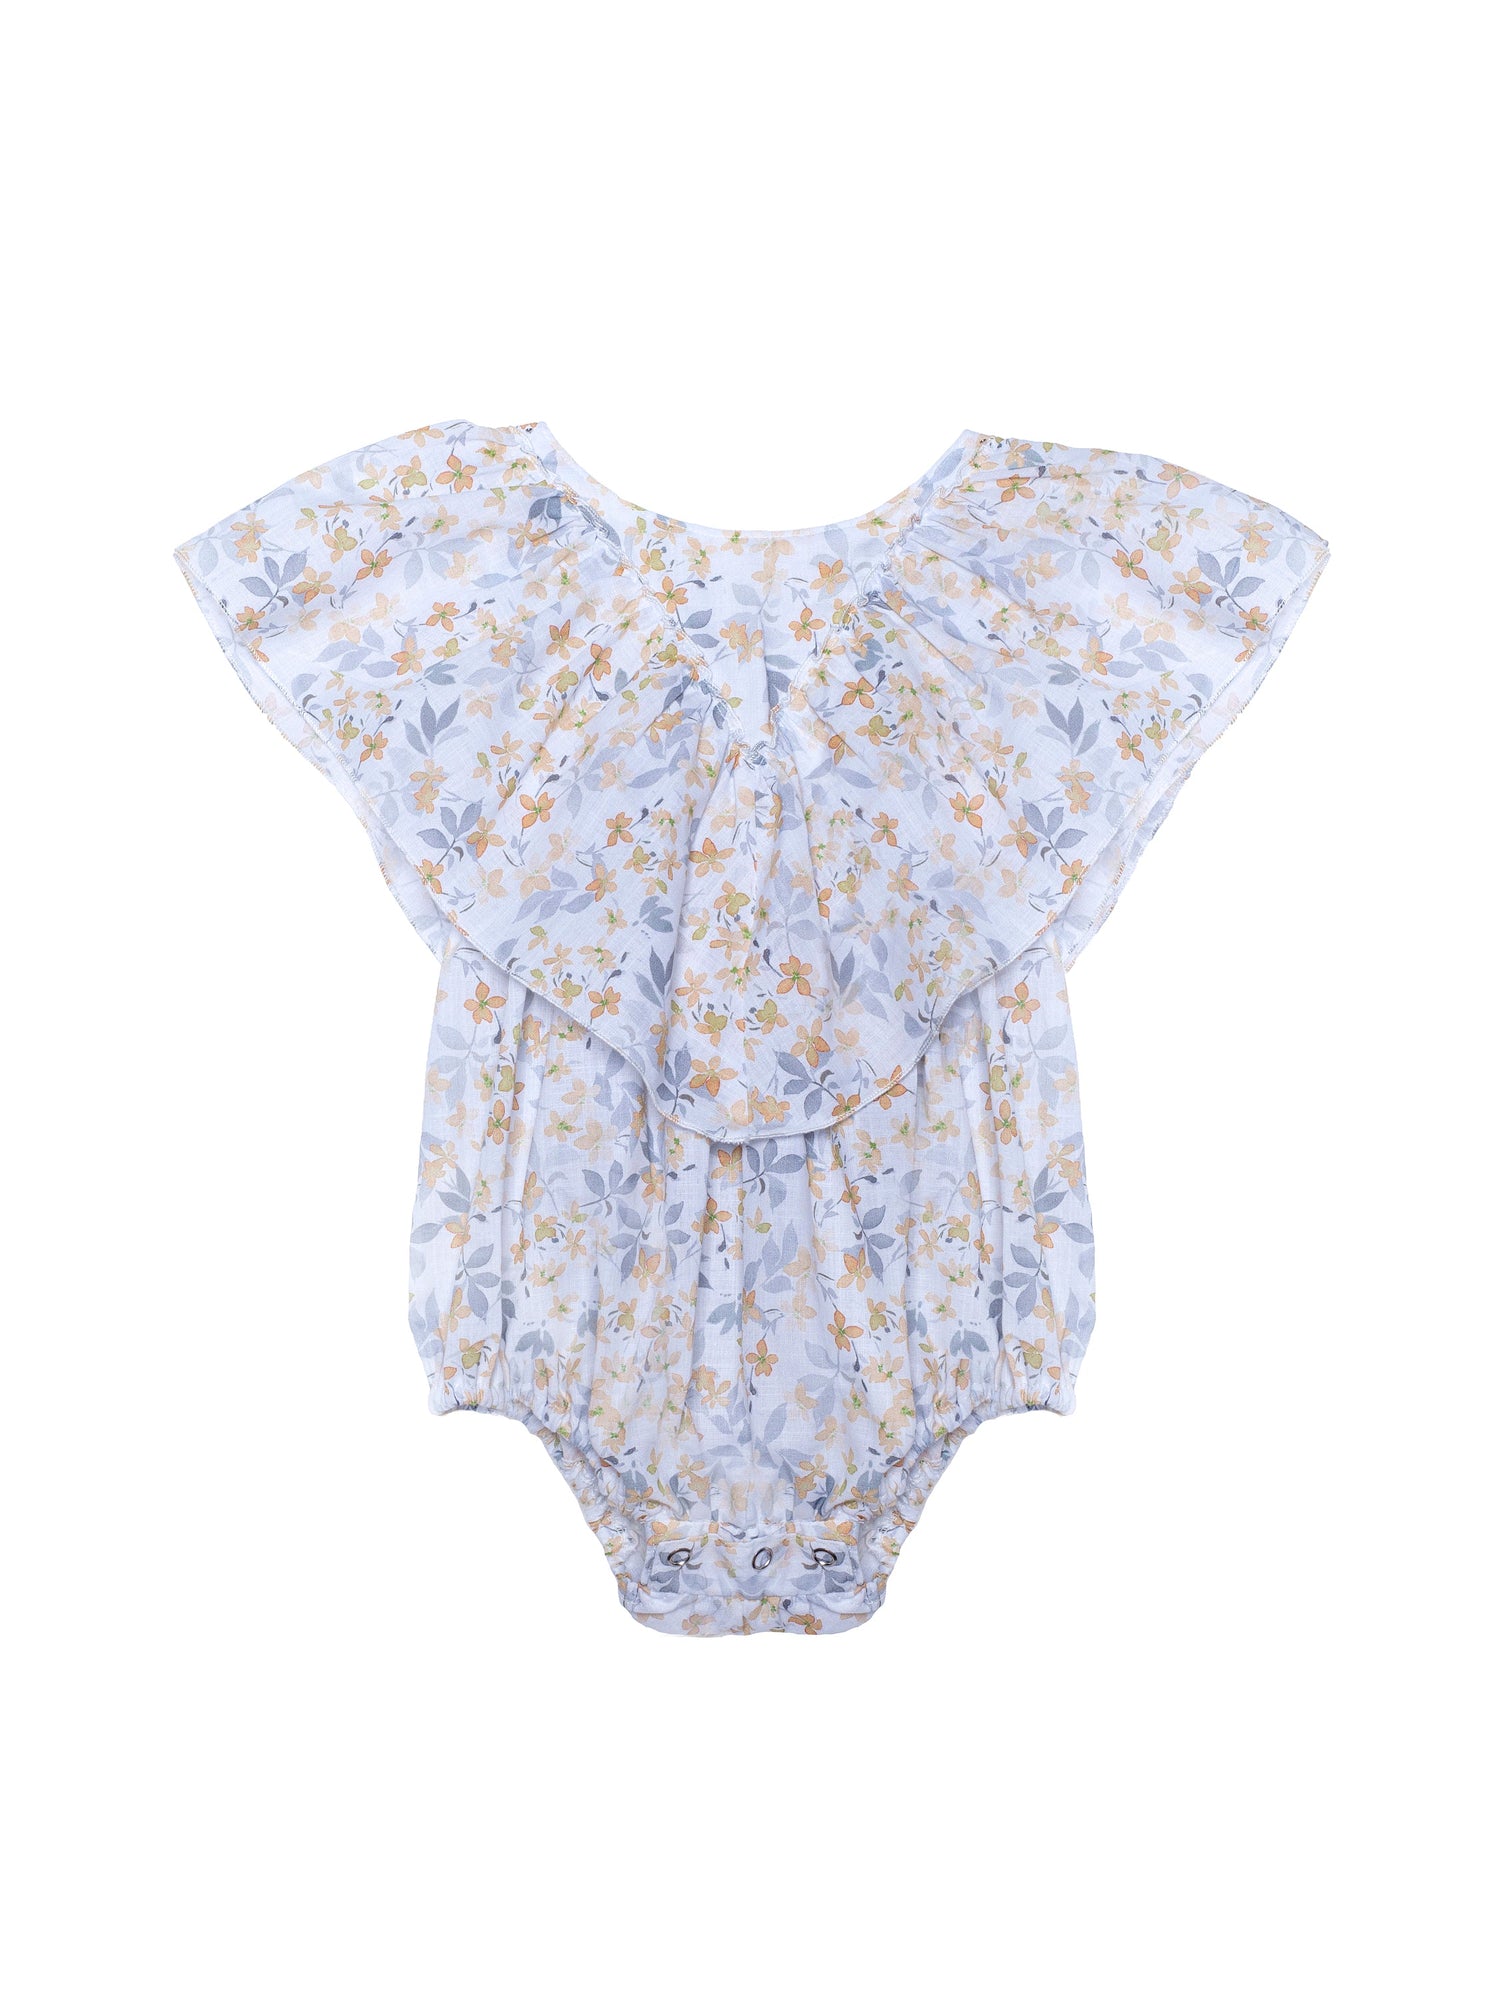 Babies' romper with flower print Baby Grows Tiny Bunny 